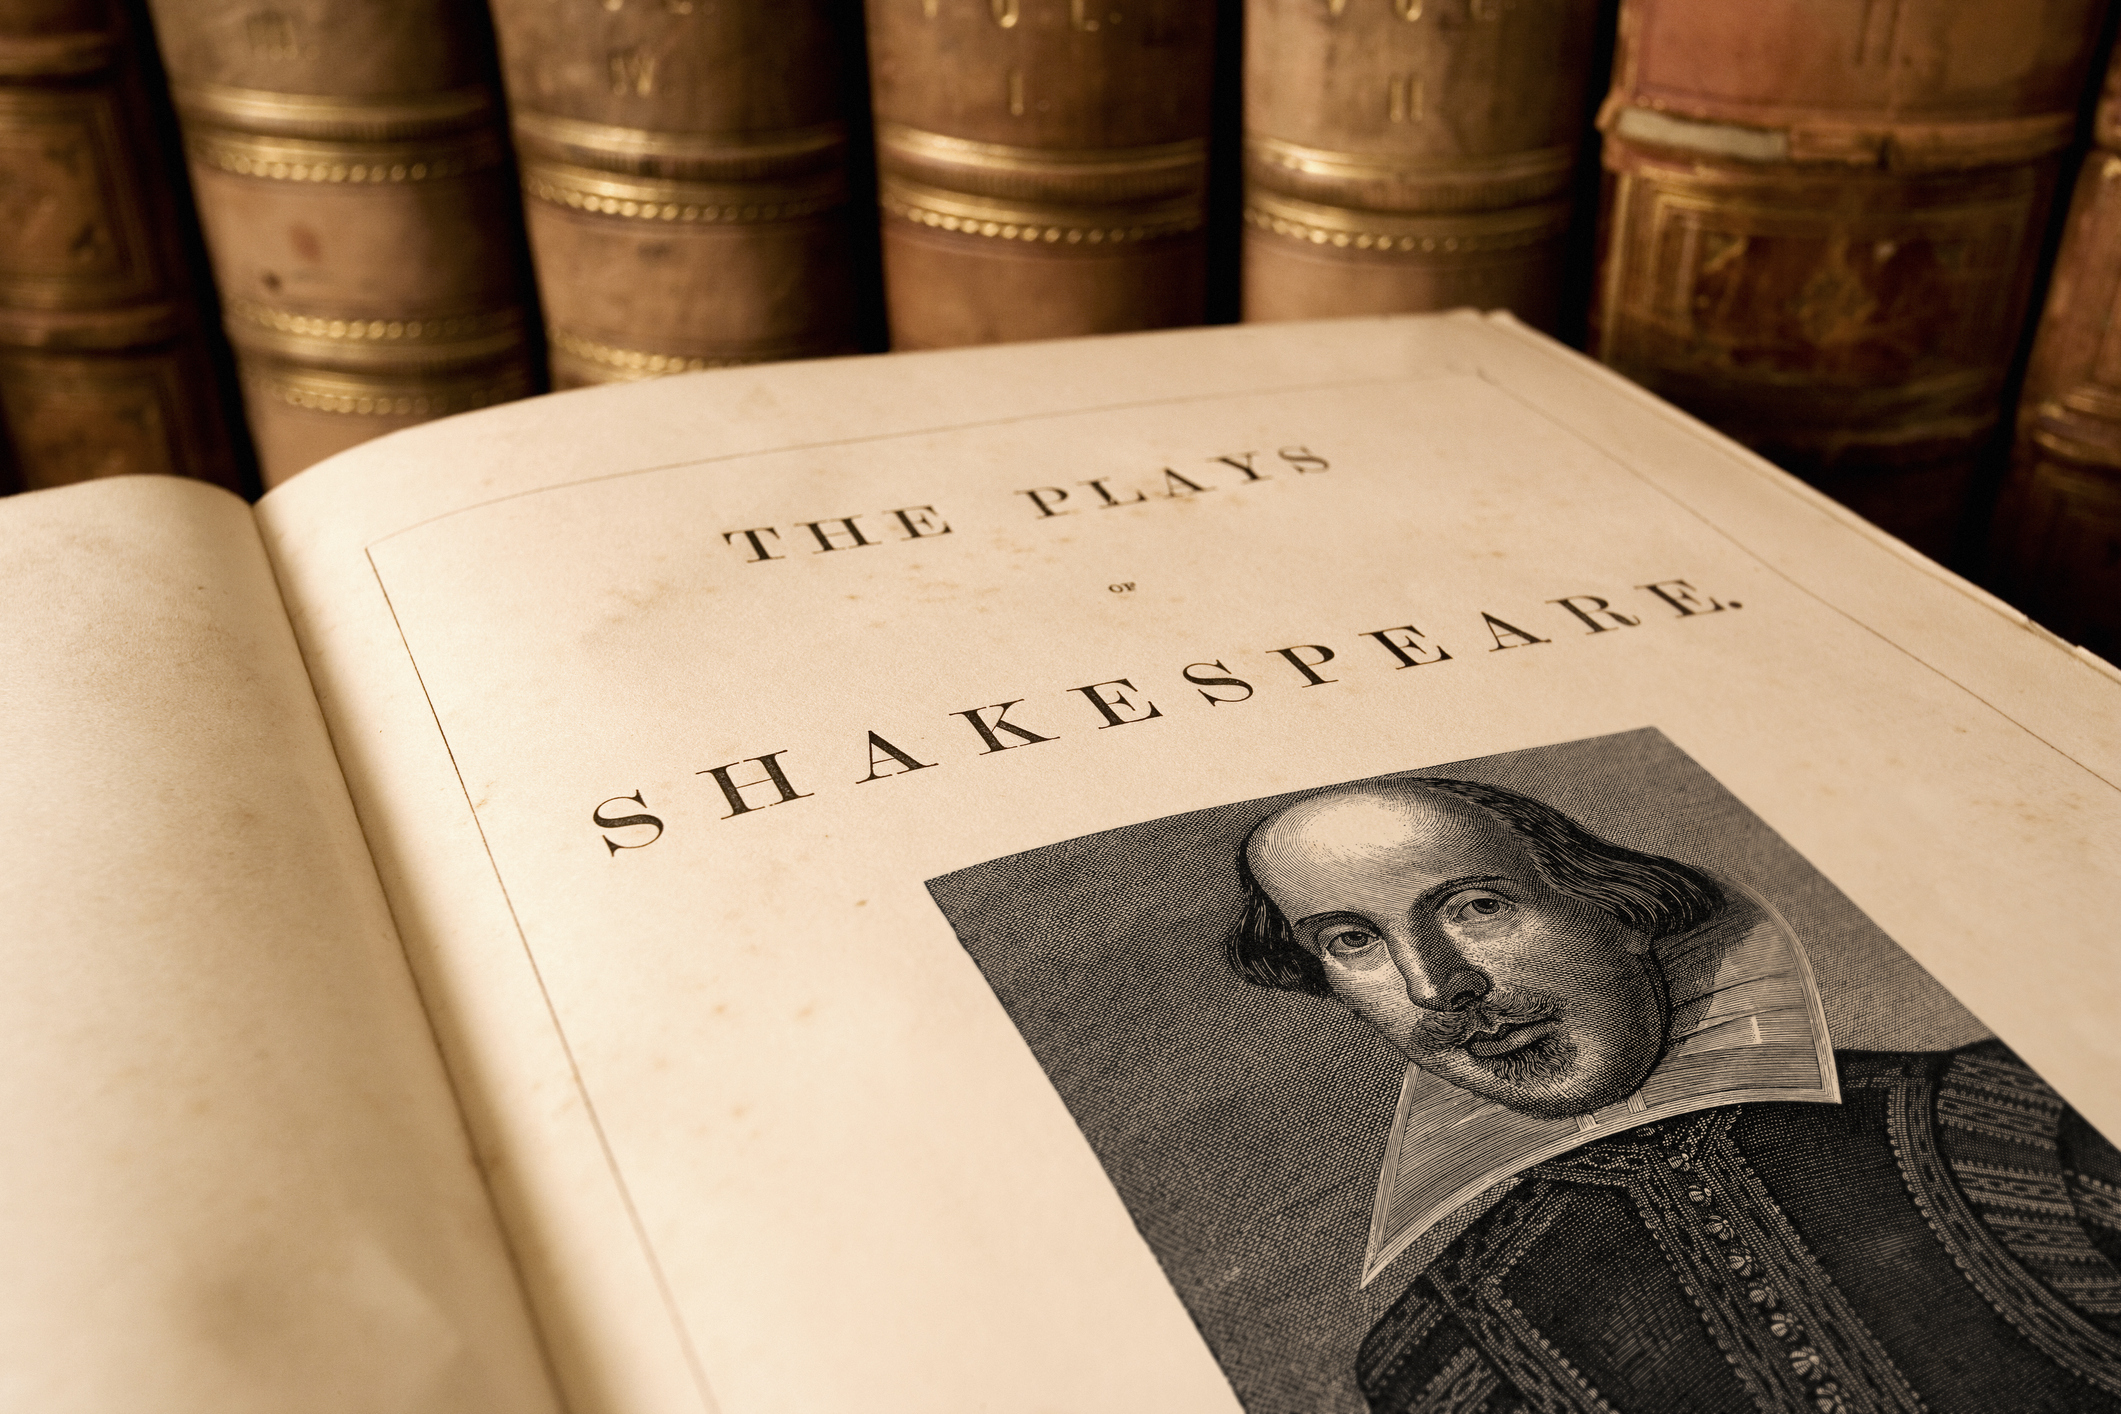 William Shakespeare: His Life and Works